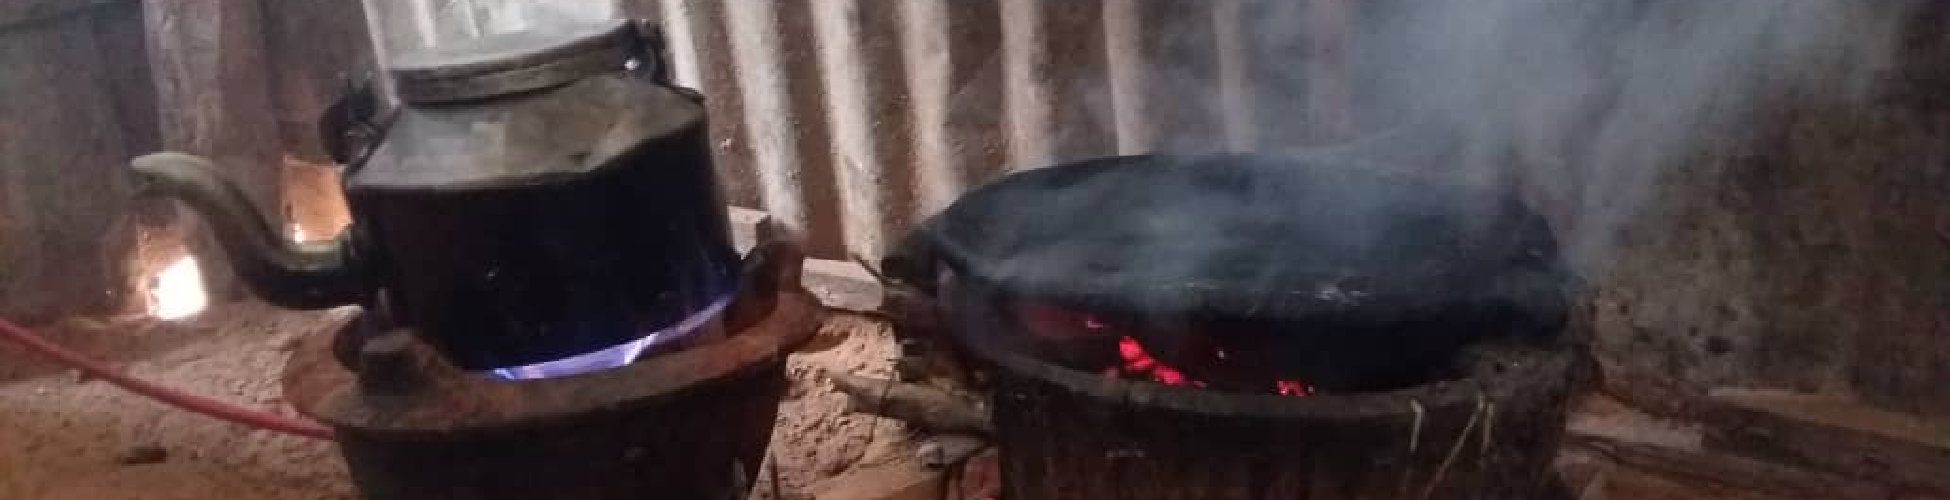 improved cook stove manufacturing